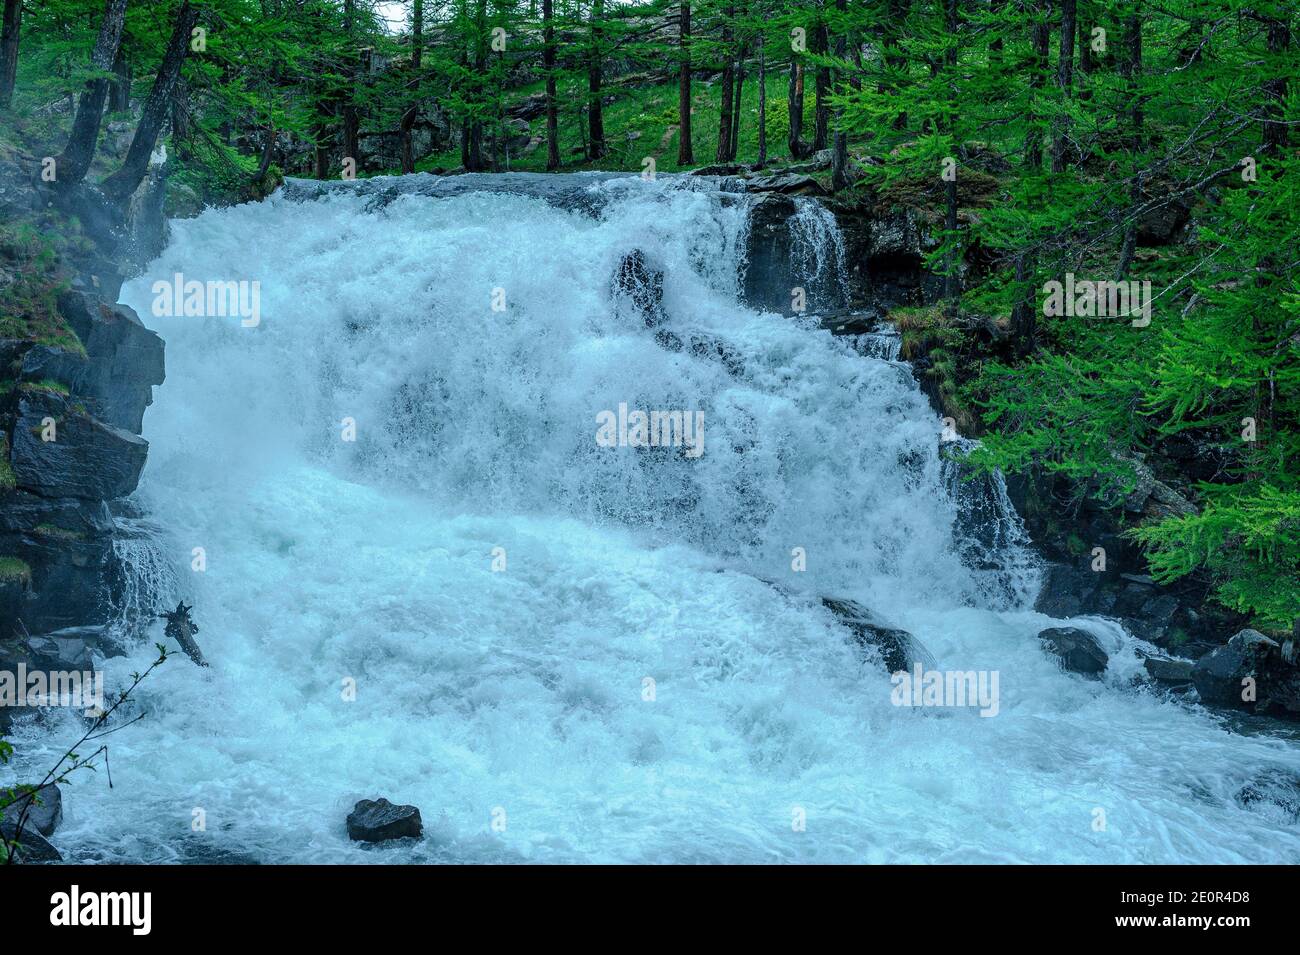 A waterfall in the valley of a river in the Hautes-Alpes, France. The swirls cause a cloud of dazzling white fog. On the bank grow patches of grass. Stock Photo